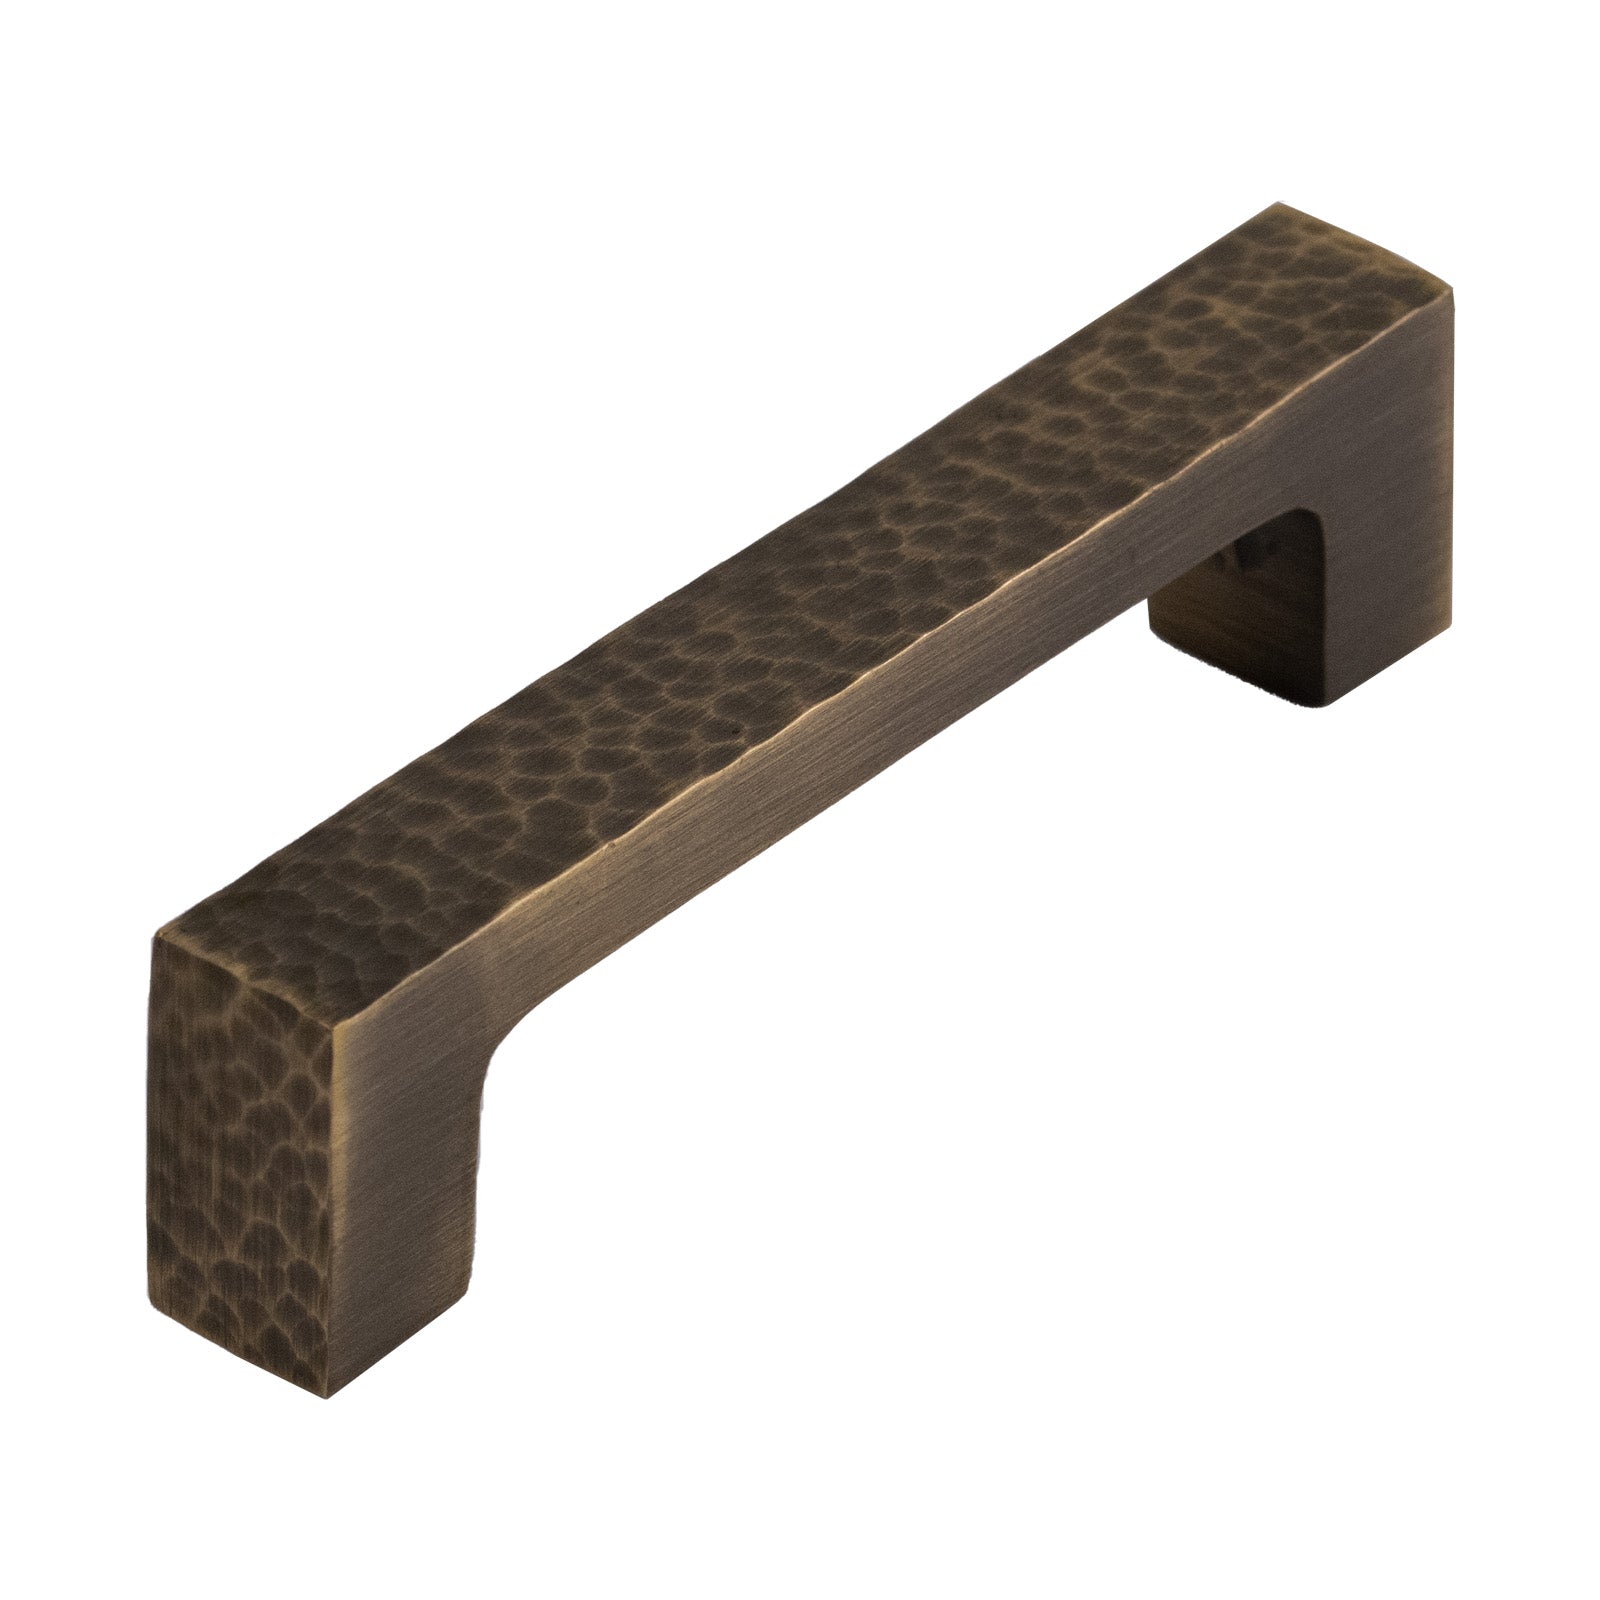 Hammered Square Pull Handles in Antique Brass 108mm